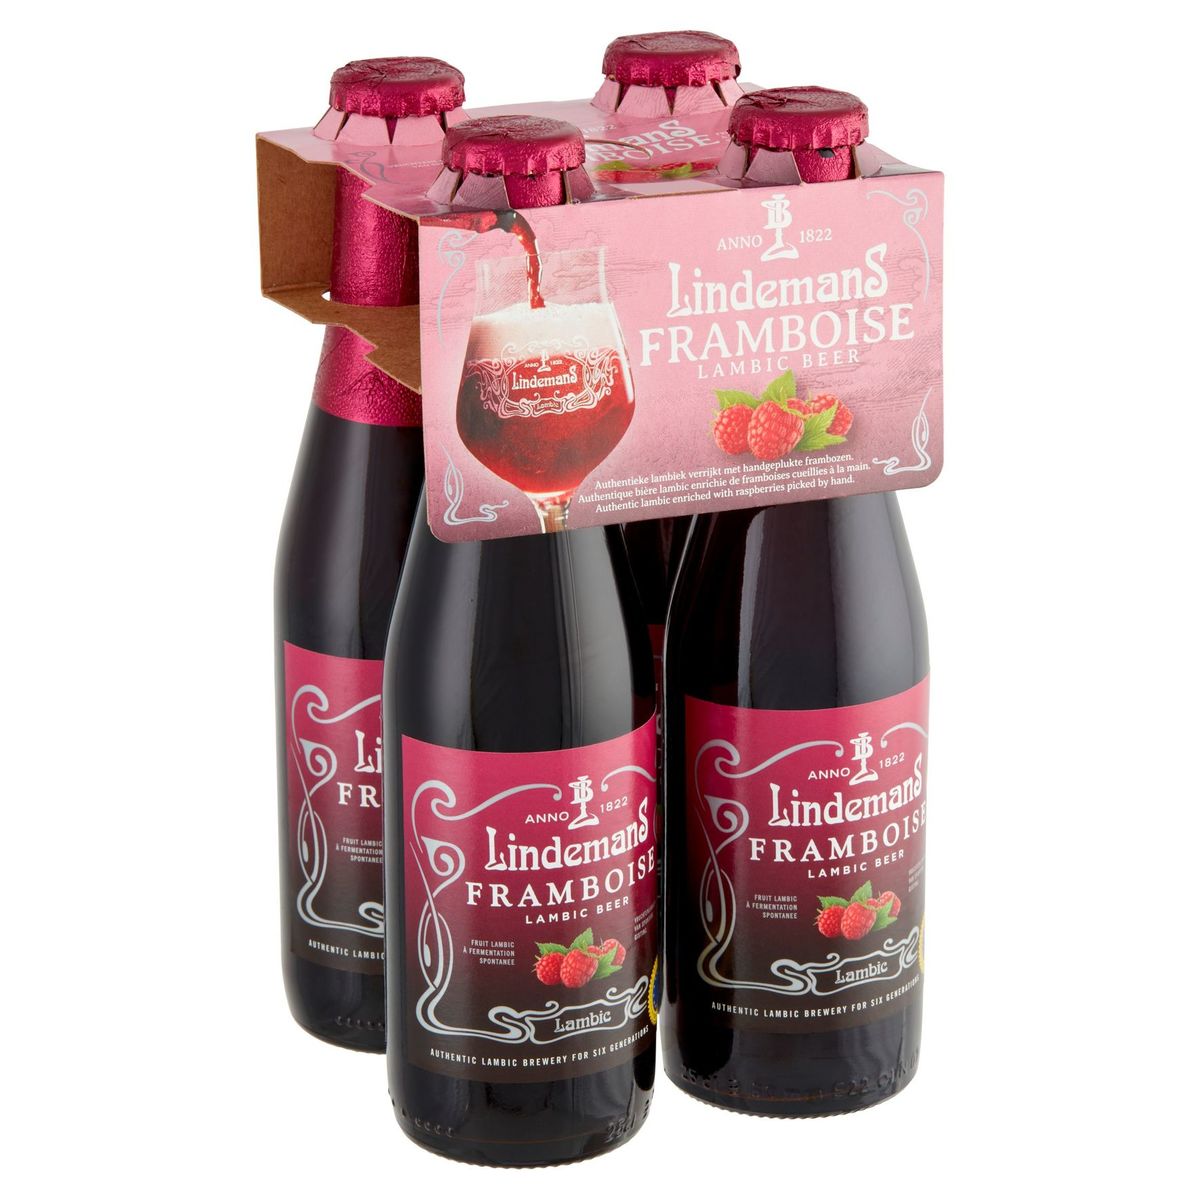 Lindemans Framboise Lambic Beer Bouteilles 4 x 250 ml